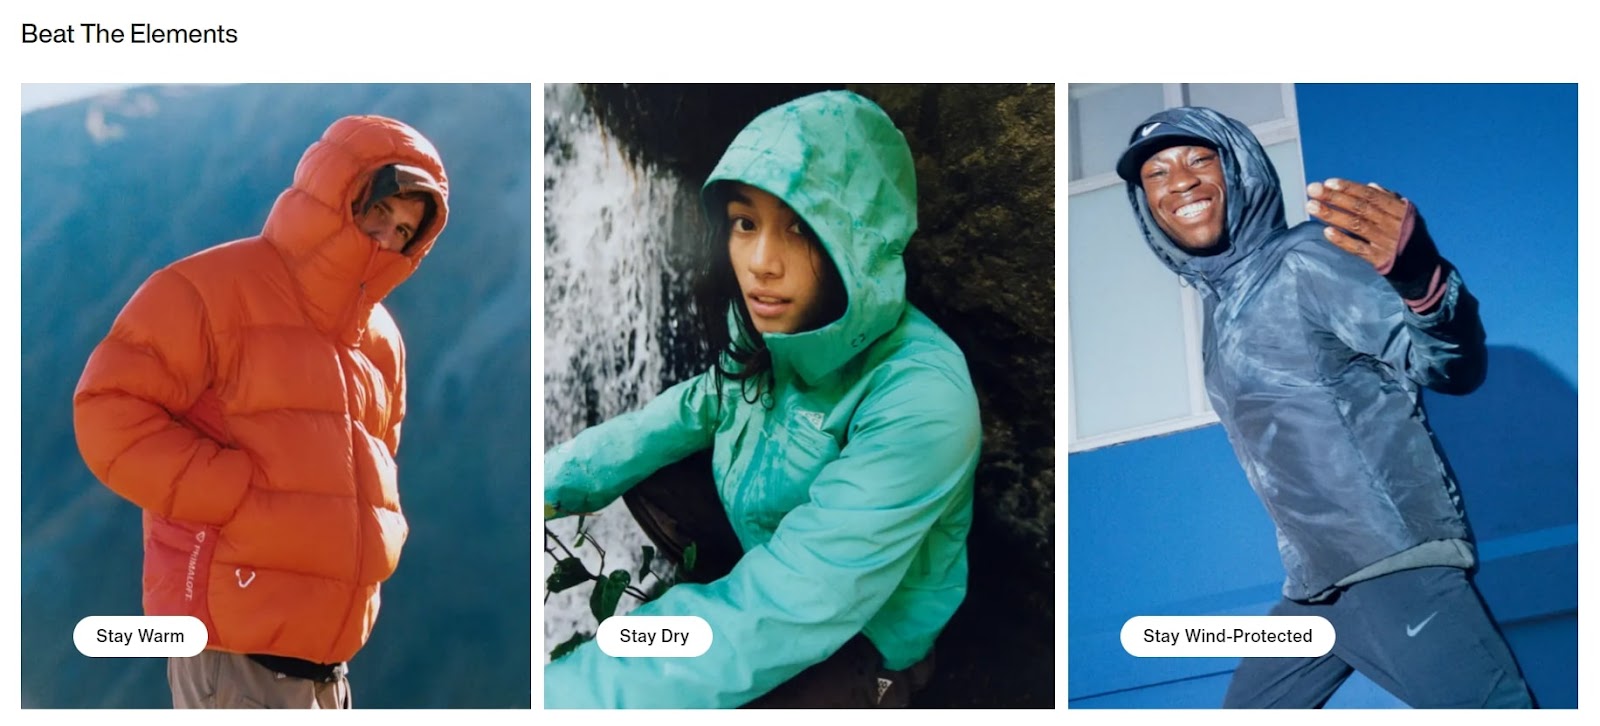 Nike’s outerwear products page